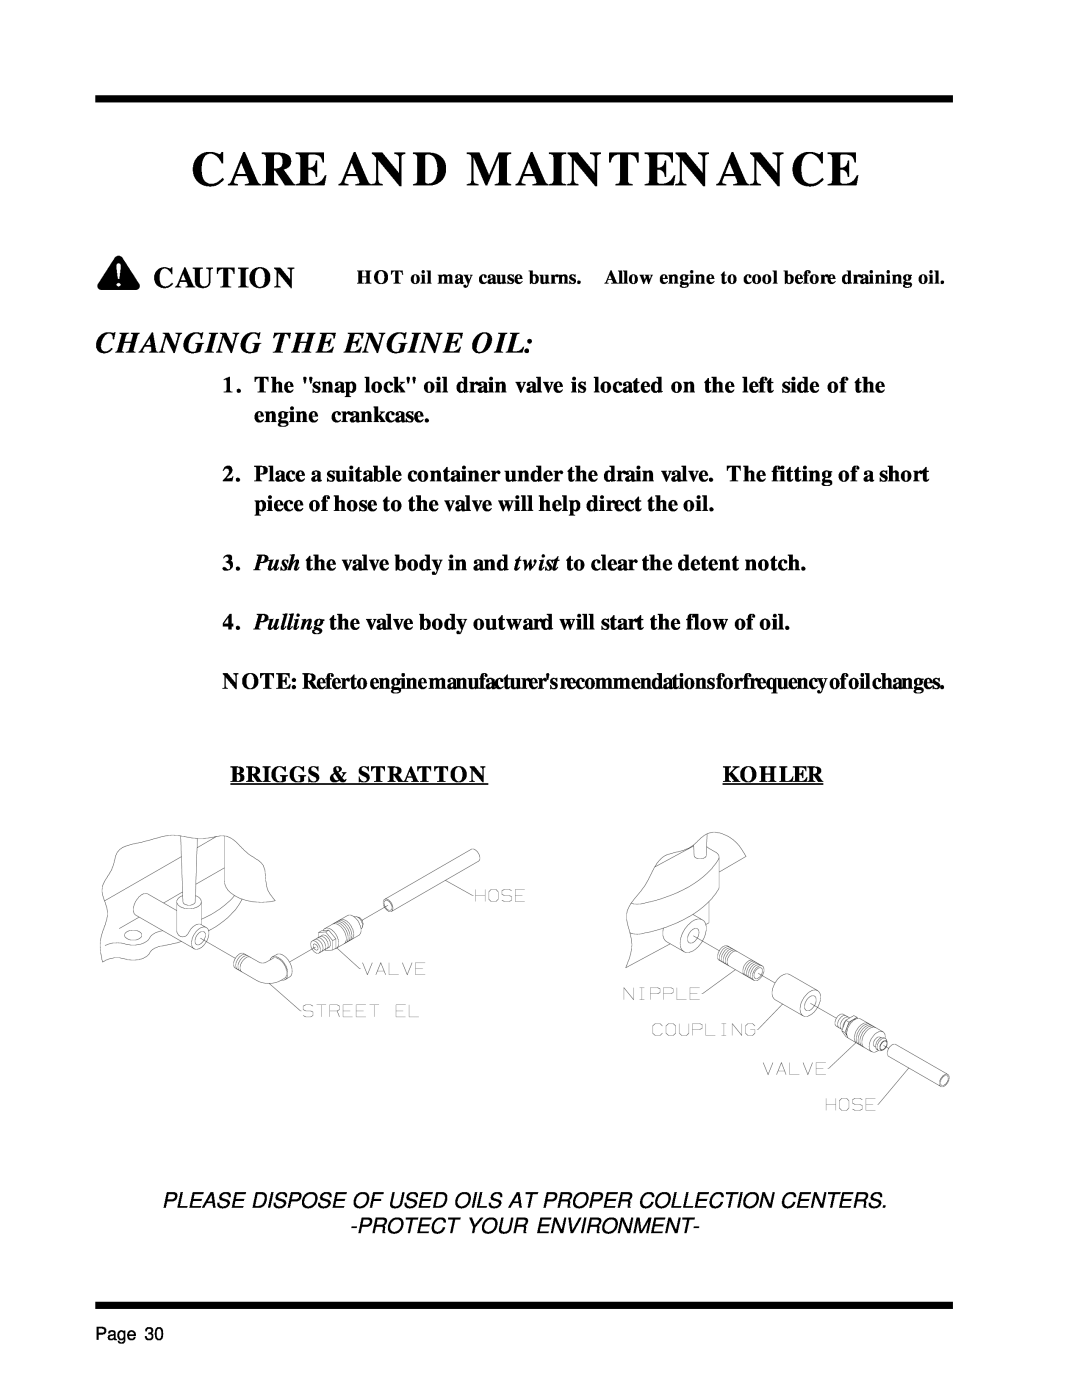 Dixon 1857-0599 manual Changing The Engine Oil, Care And Maintenance 